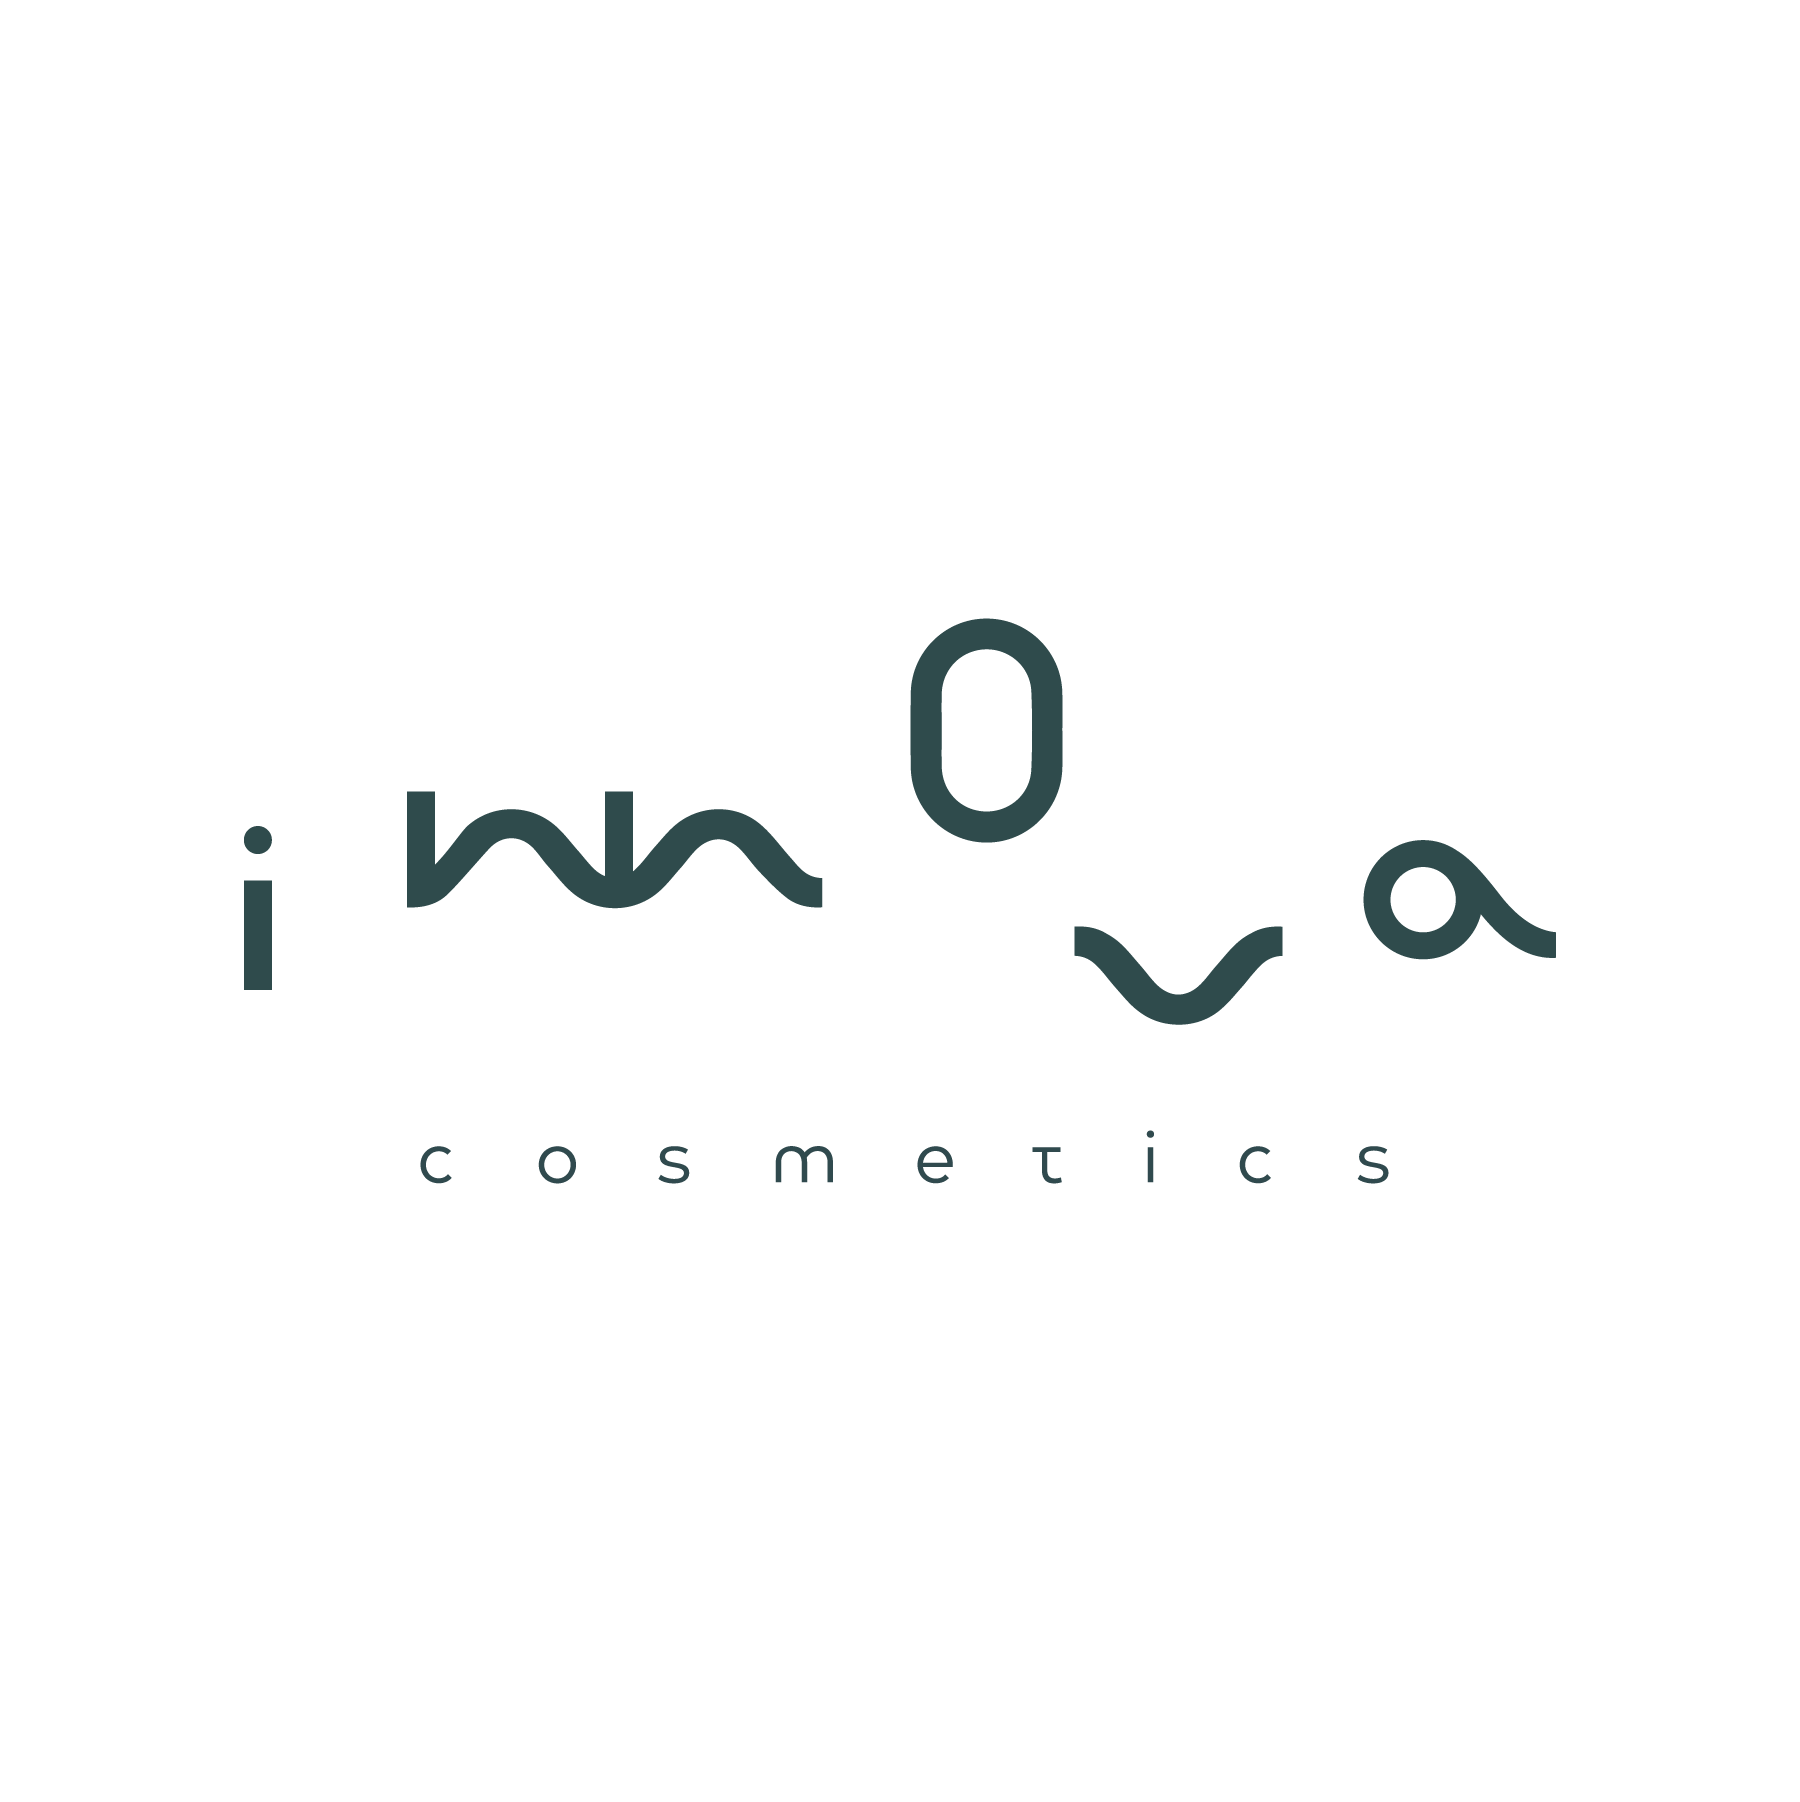 Innova logo design by logo designer OTLICHNOSTI for your inspiration and for the worlds largest logo competition